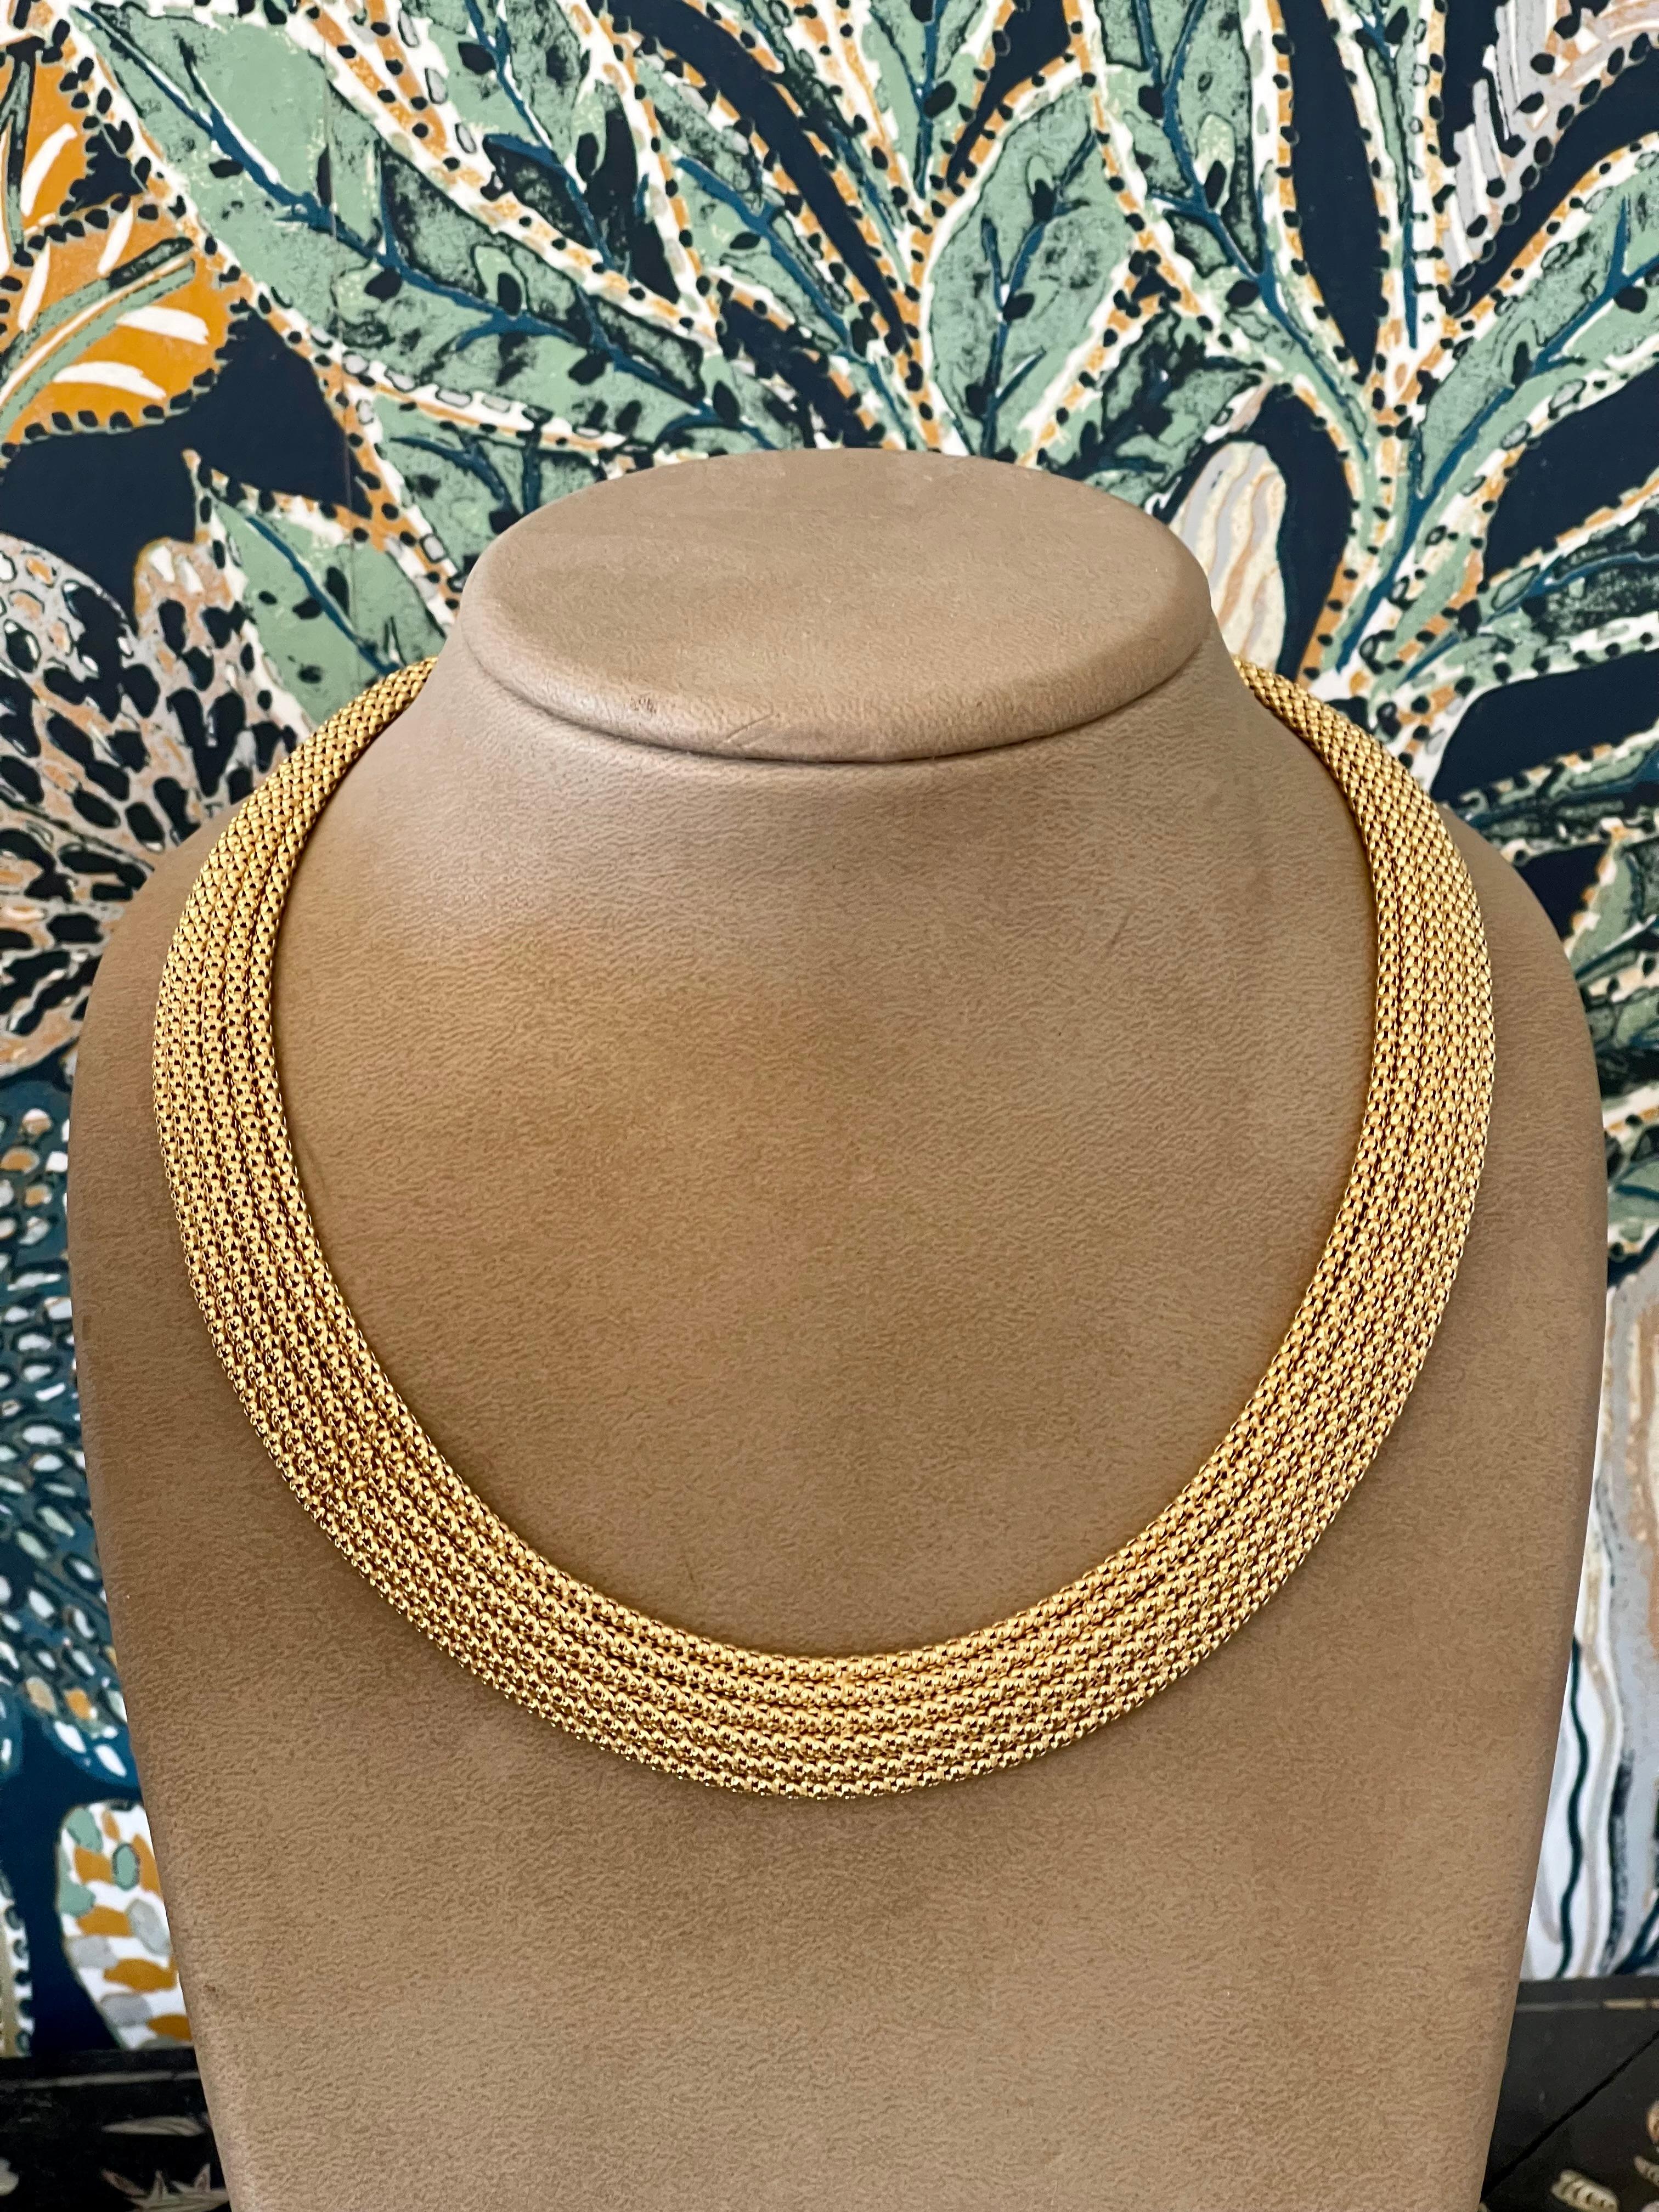 A true classic, this lovely mesh necklace is an absolute statement piece. The movement throughout the necklace is so smooth and subtle that it is easily worn without a thought, but the profile is bold and is visually just gorgeous. It was designed